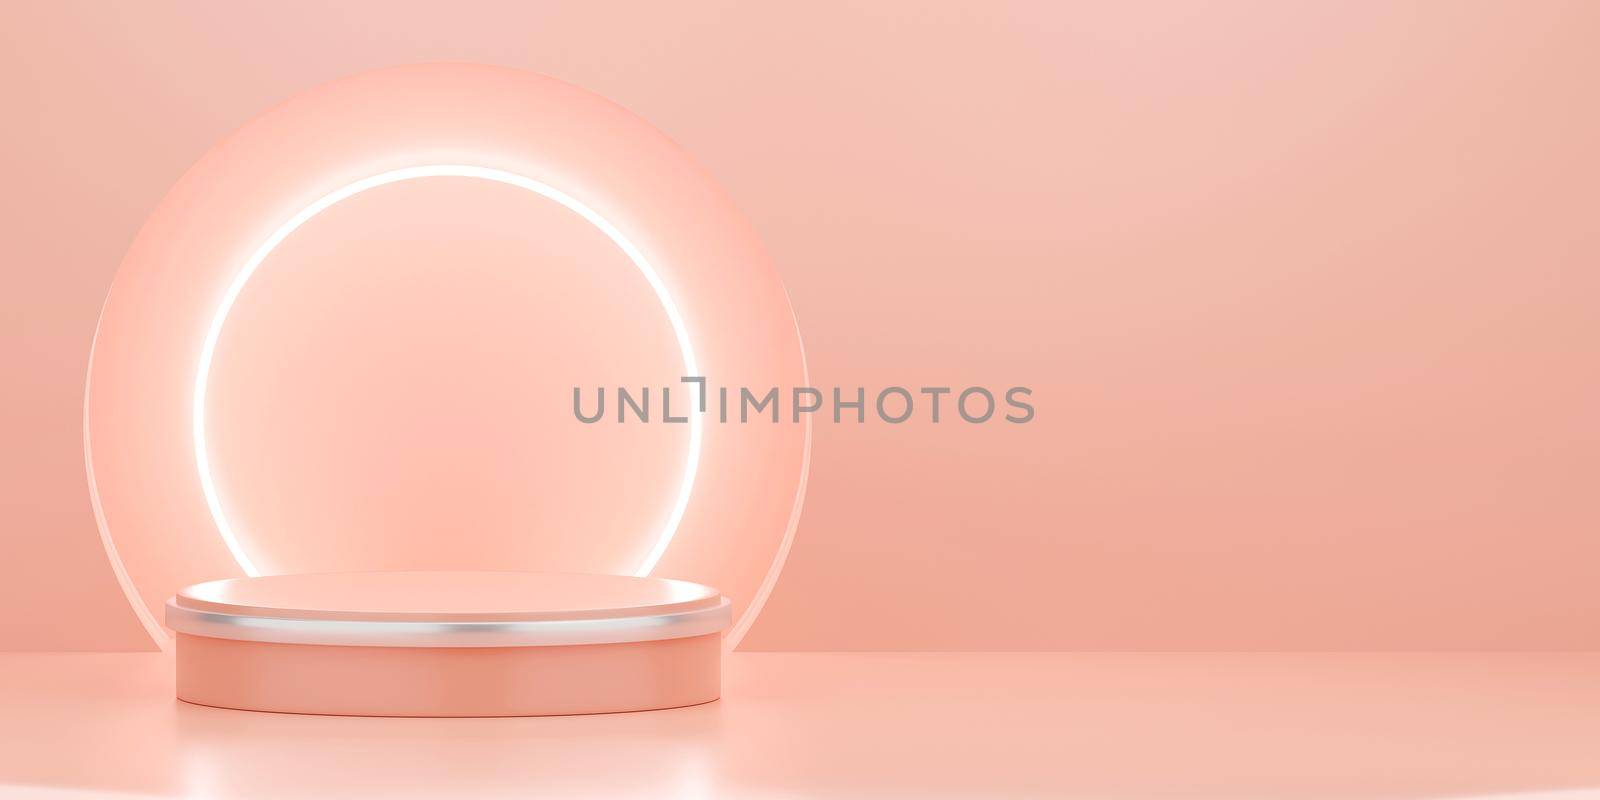 Scene of pastel color with geometric shape podium with lamp on pink background, 3d illustration by nutzchotwarut